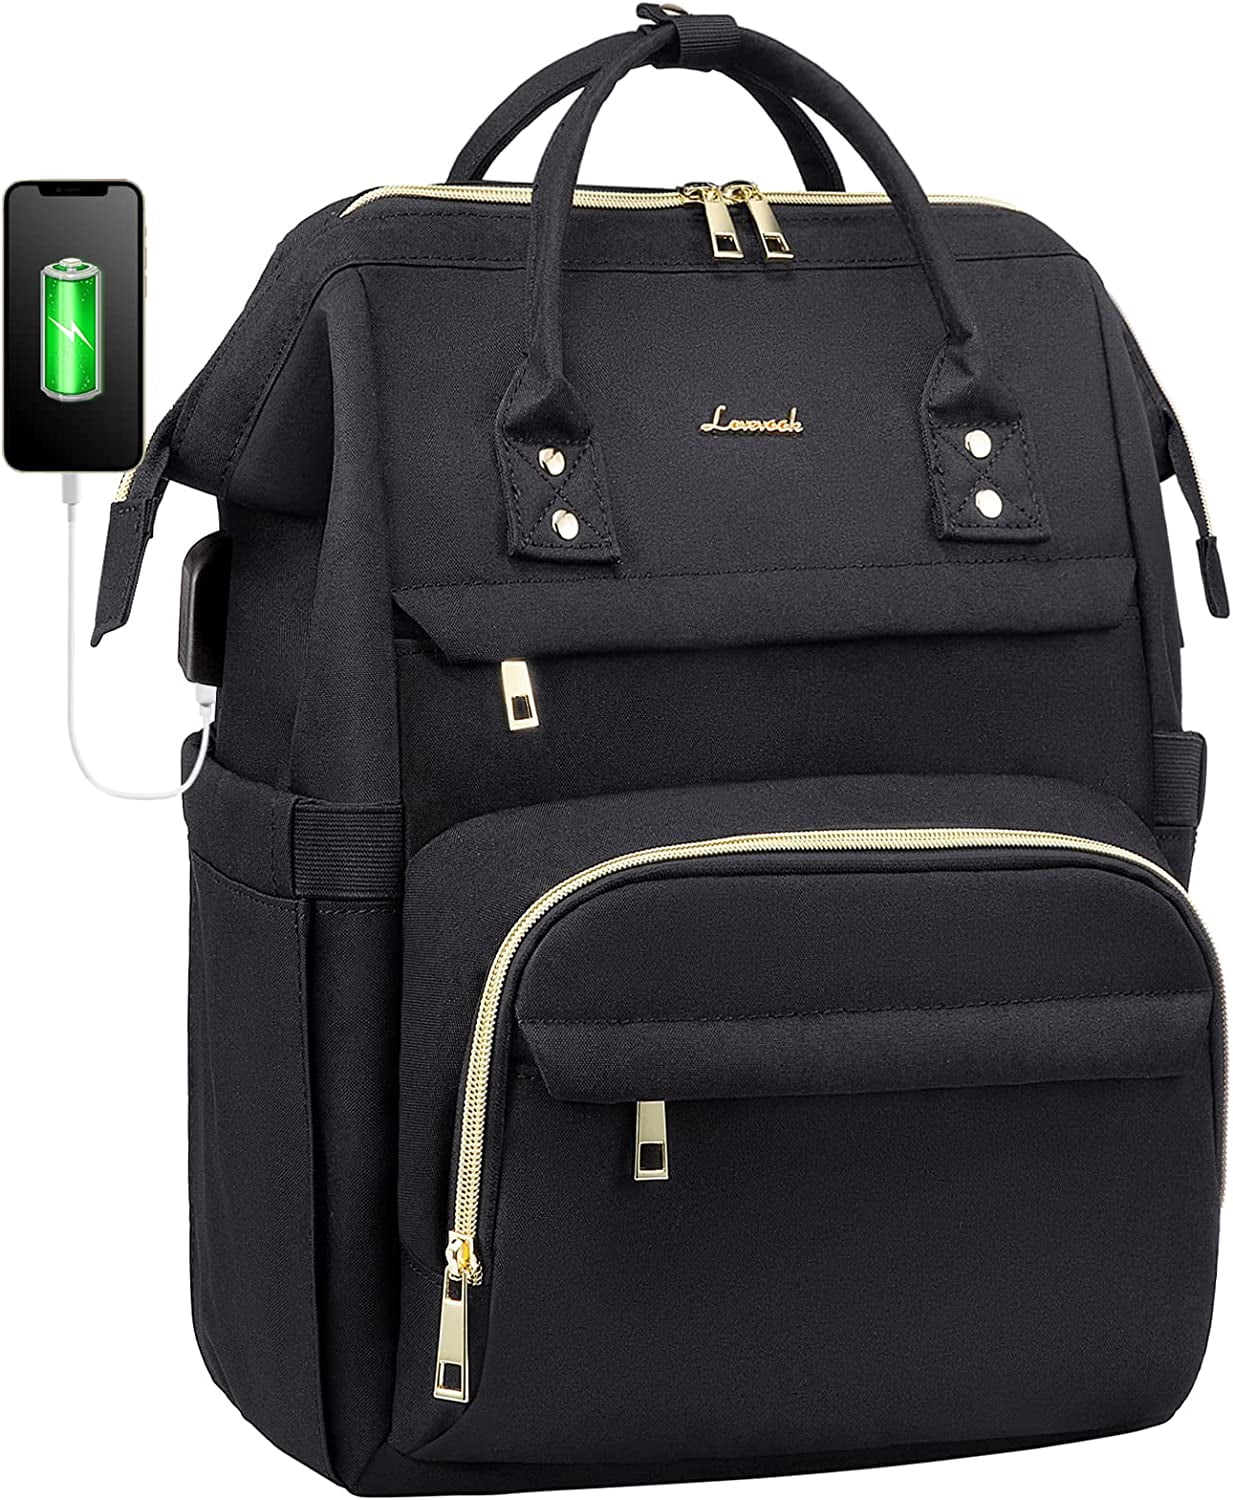 Lovevook Laptop Backpack for Women, 17